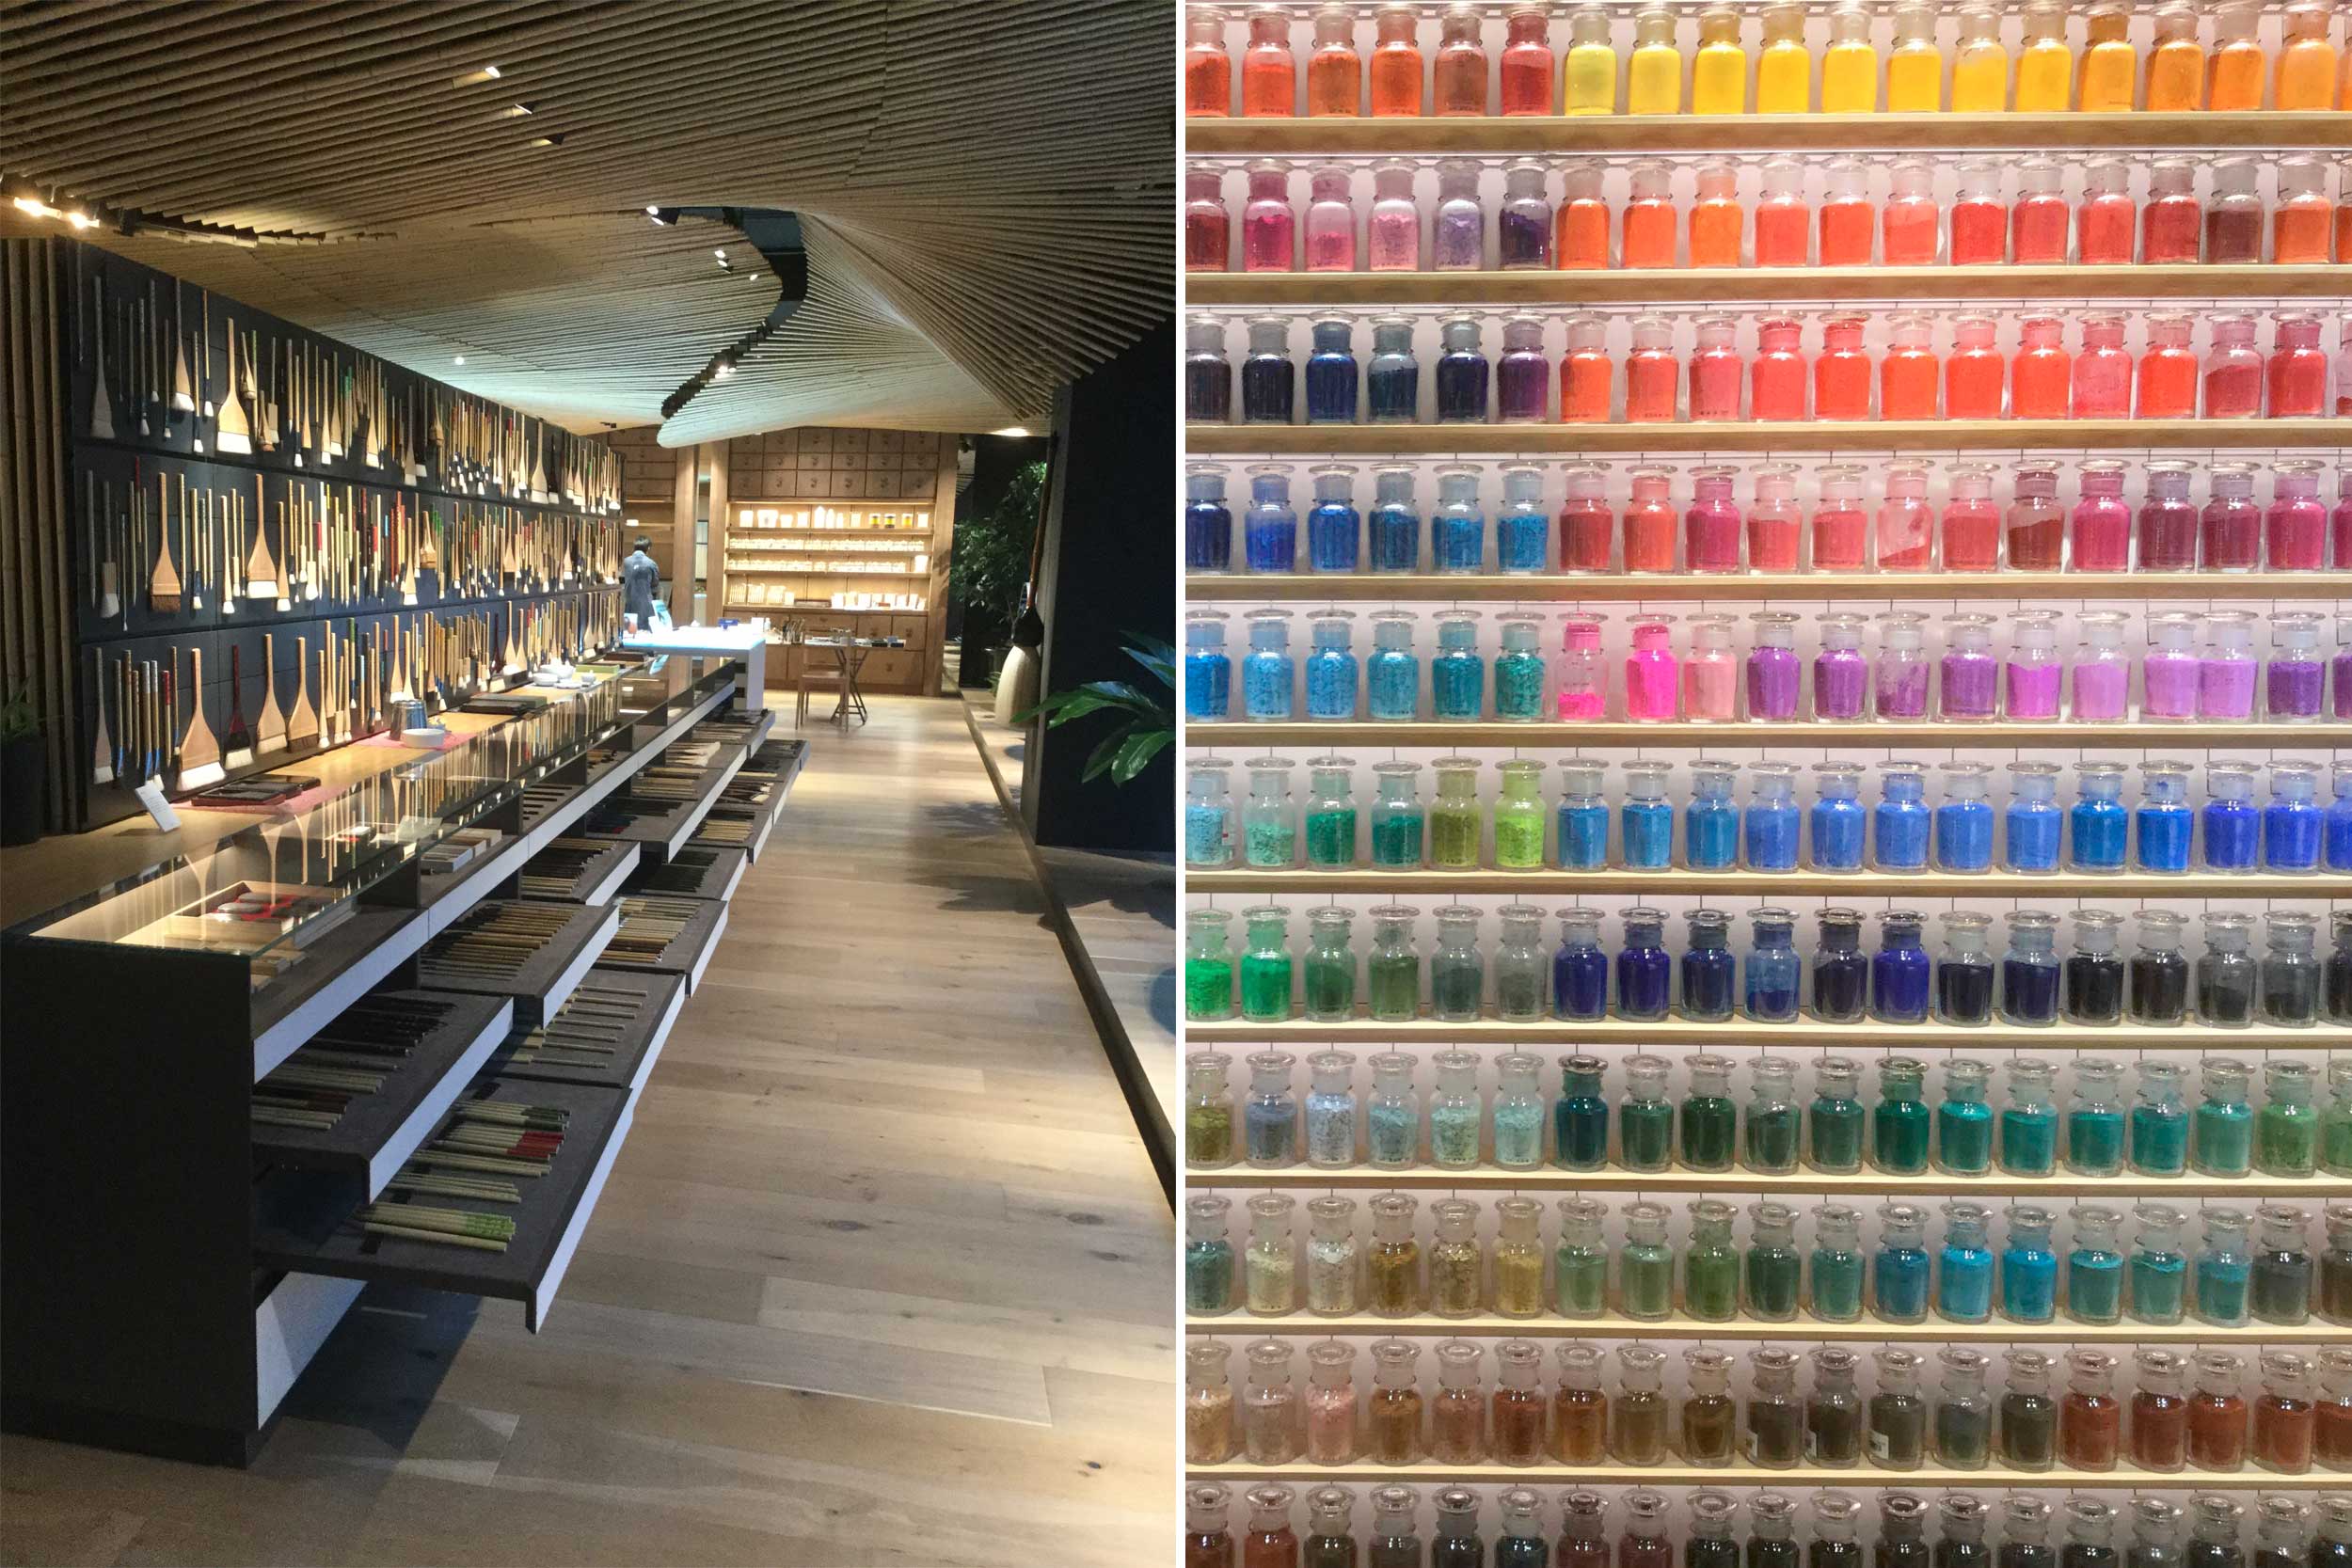 Collage of the linear interior of a paint shop and shelves lined with brightly coloured pigments